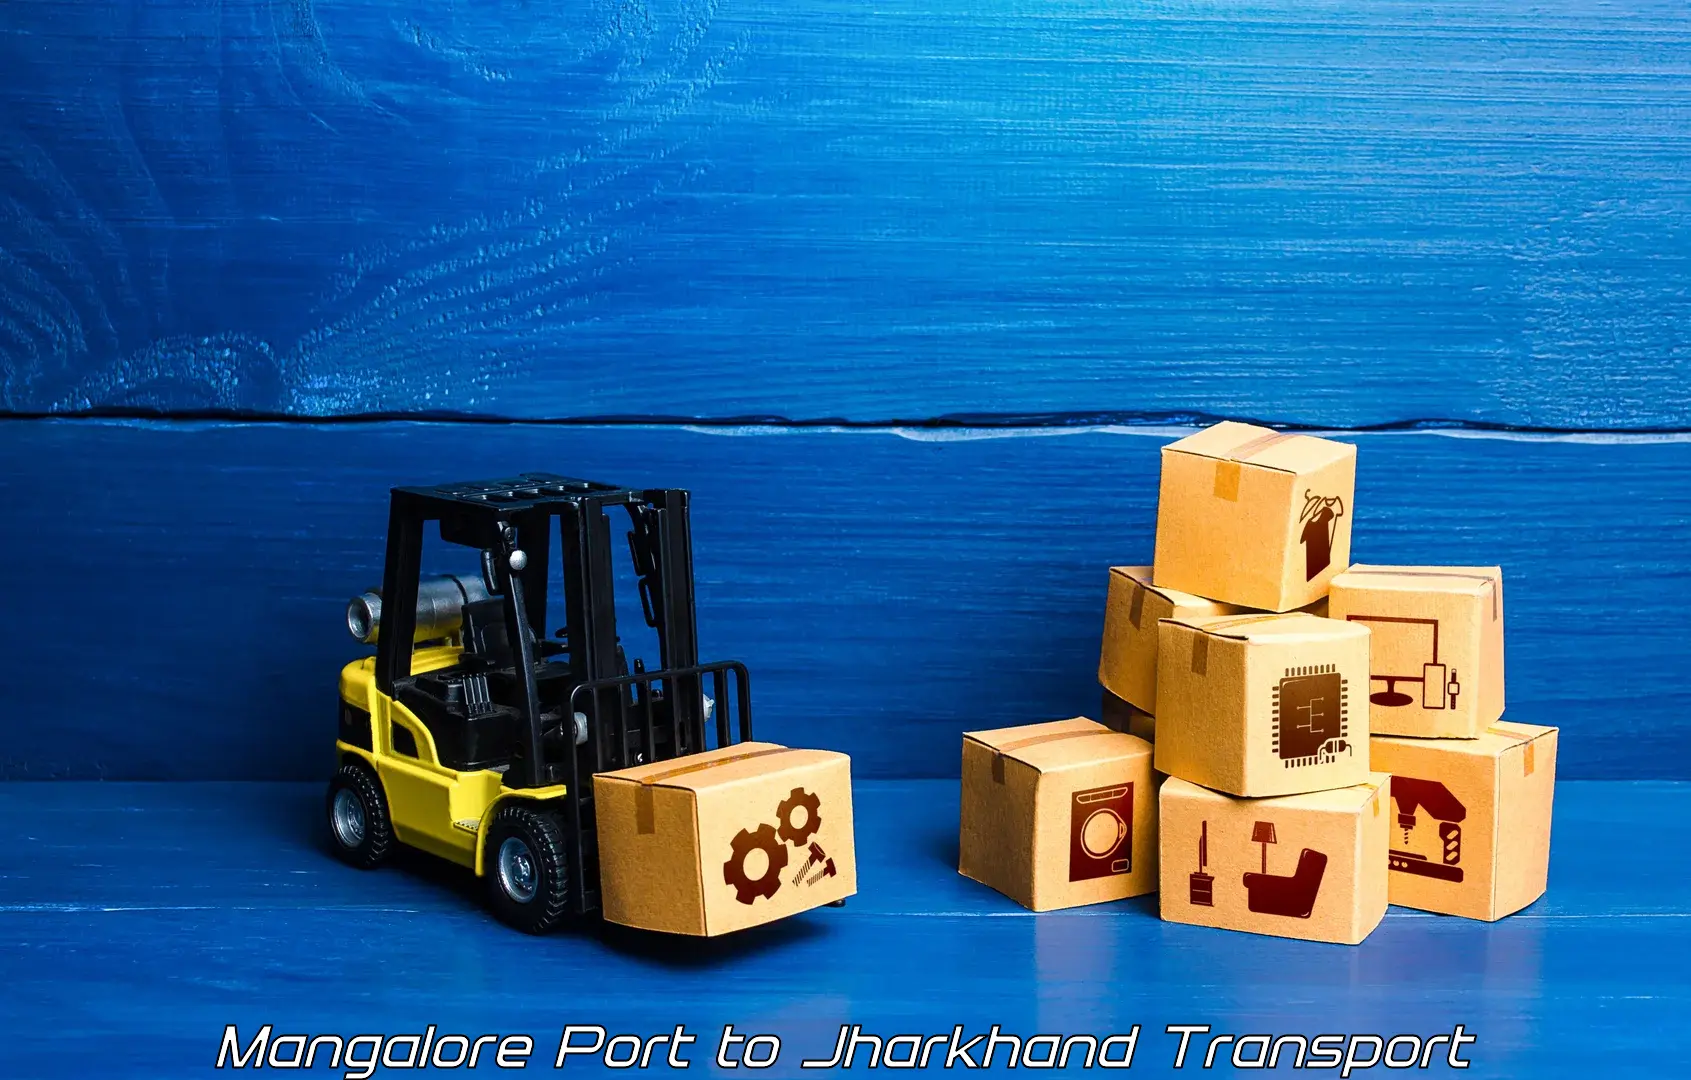 Goods delivery service Mangalore Port to Chandil